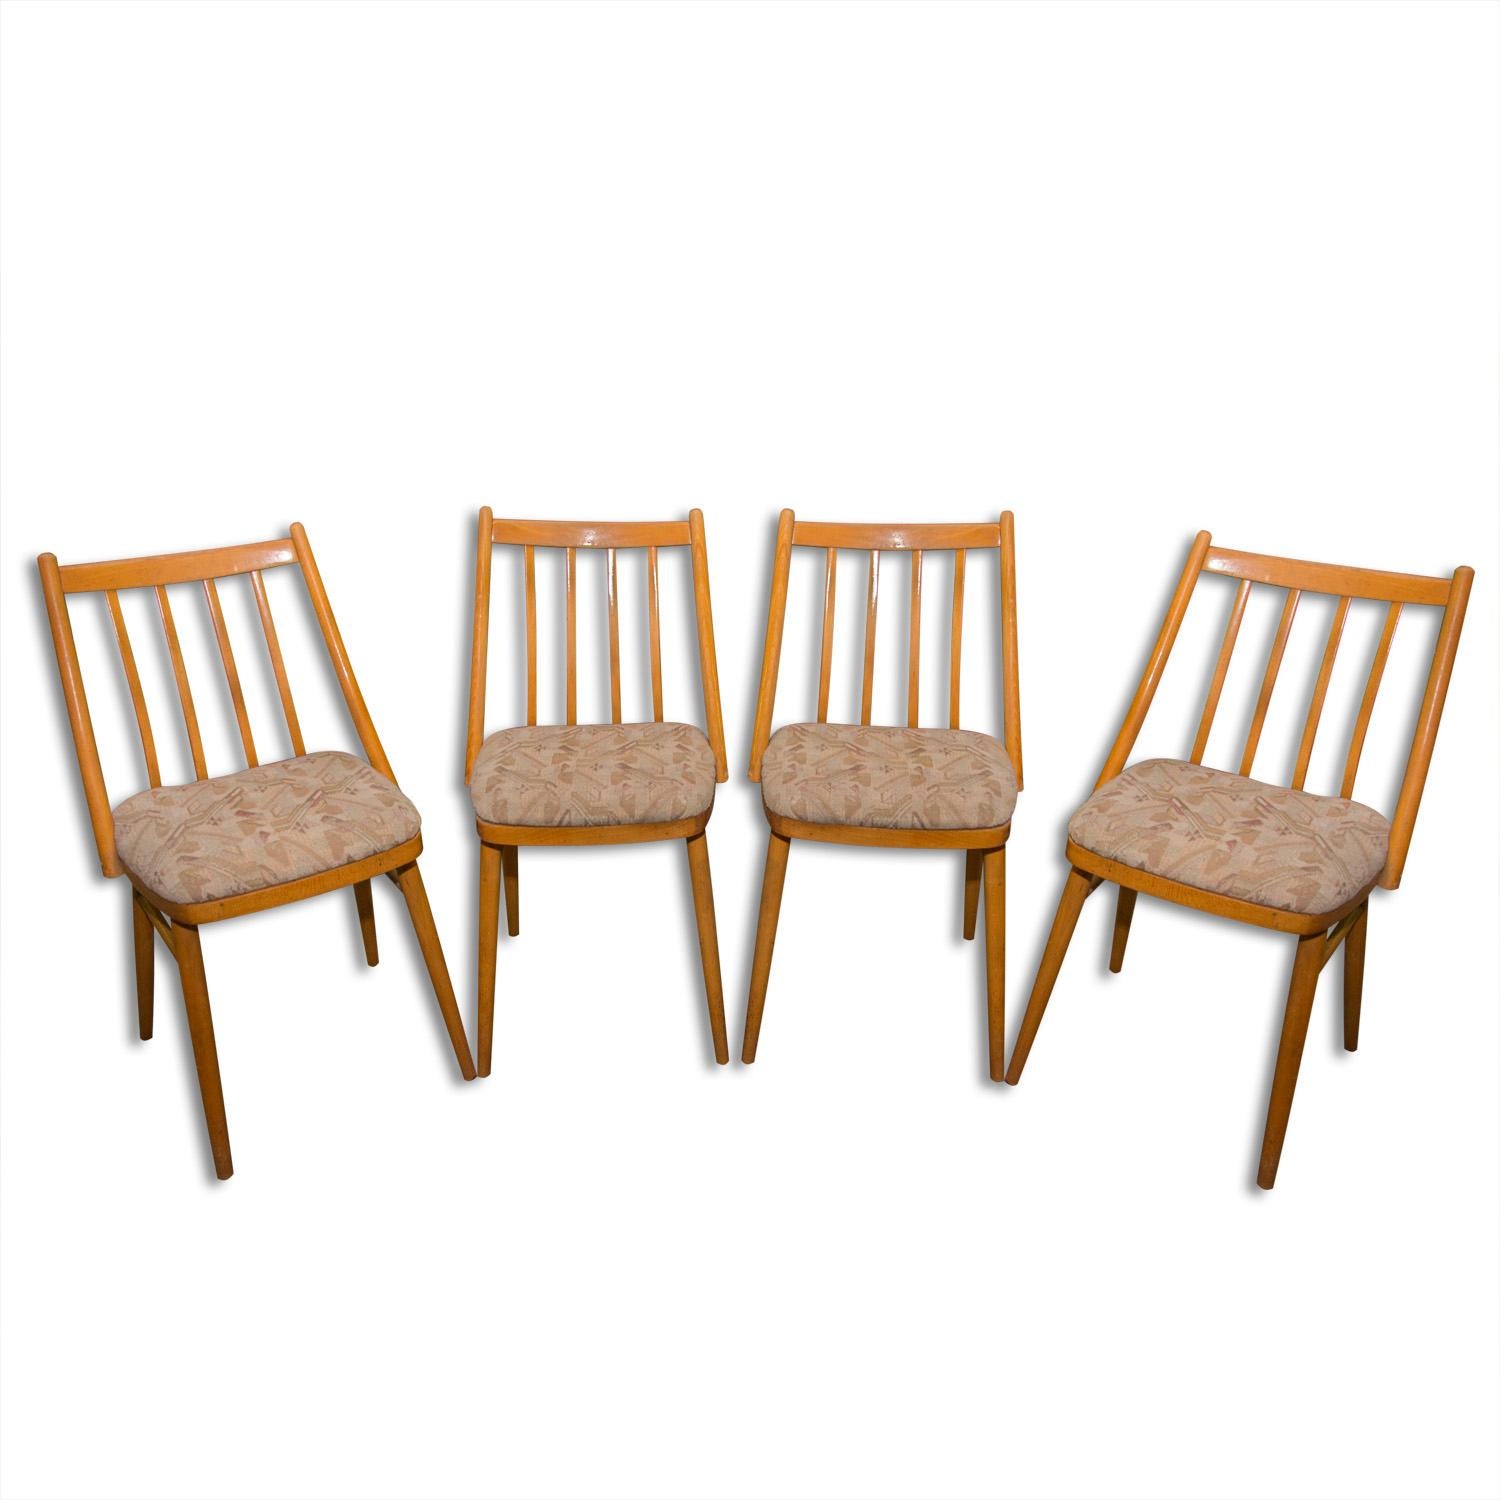 These bentwood dining chairs were made in the former Czechoslovakia by Mier Topolcany in the 1960´s. It was designed by Czechoslovak architect Antonín Šuman.
These are in good vintage condition, shows signs of age and using. Beech wood